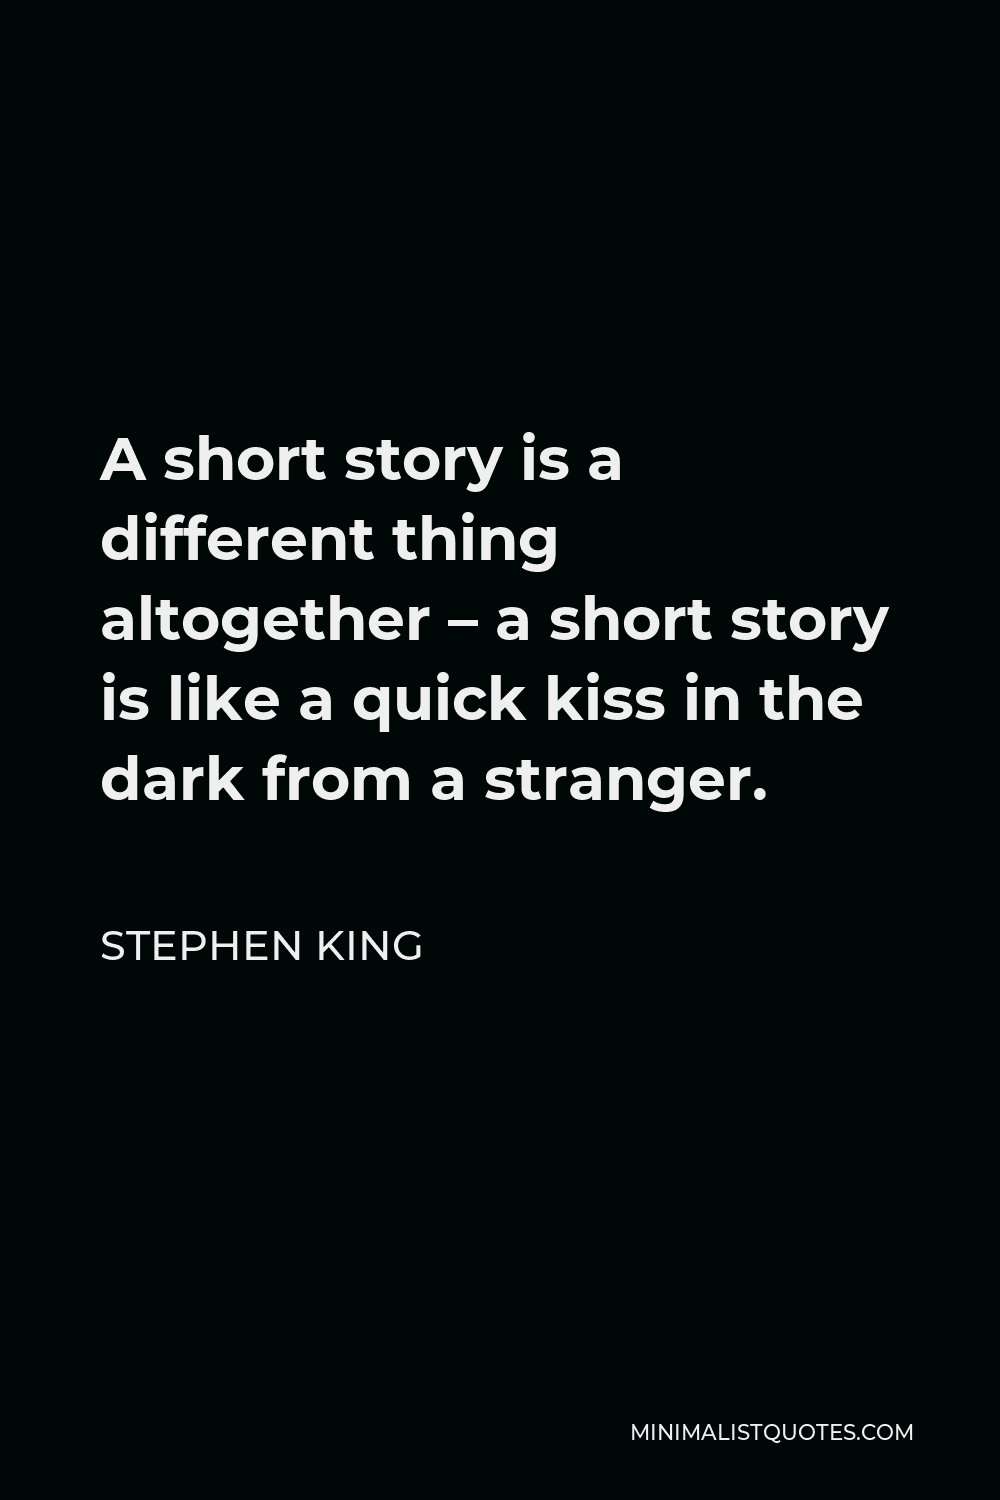 Stephen King Quote - A short story is a different thing altogether – a short story is like a quick kiss in the dark from a stranger.